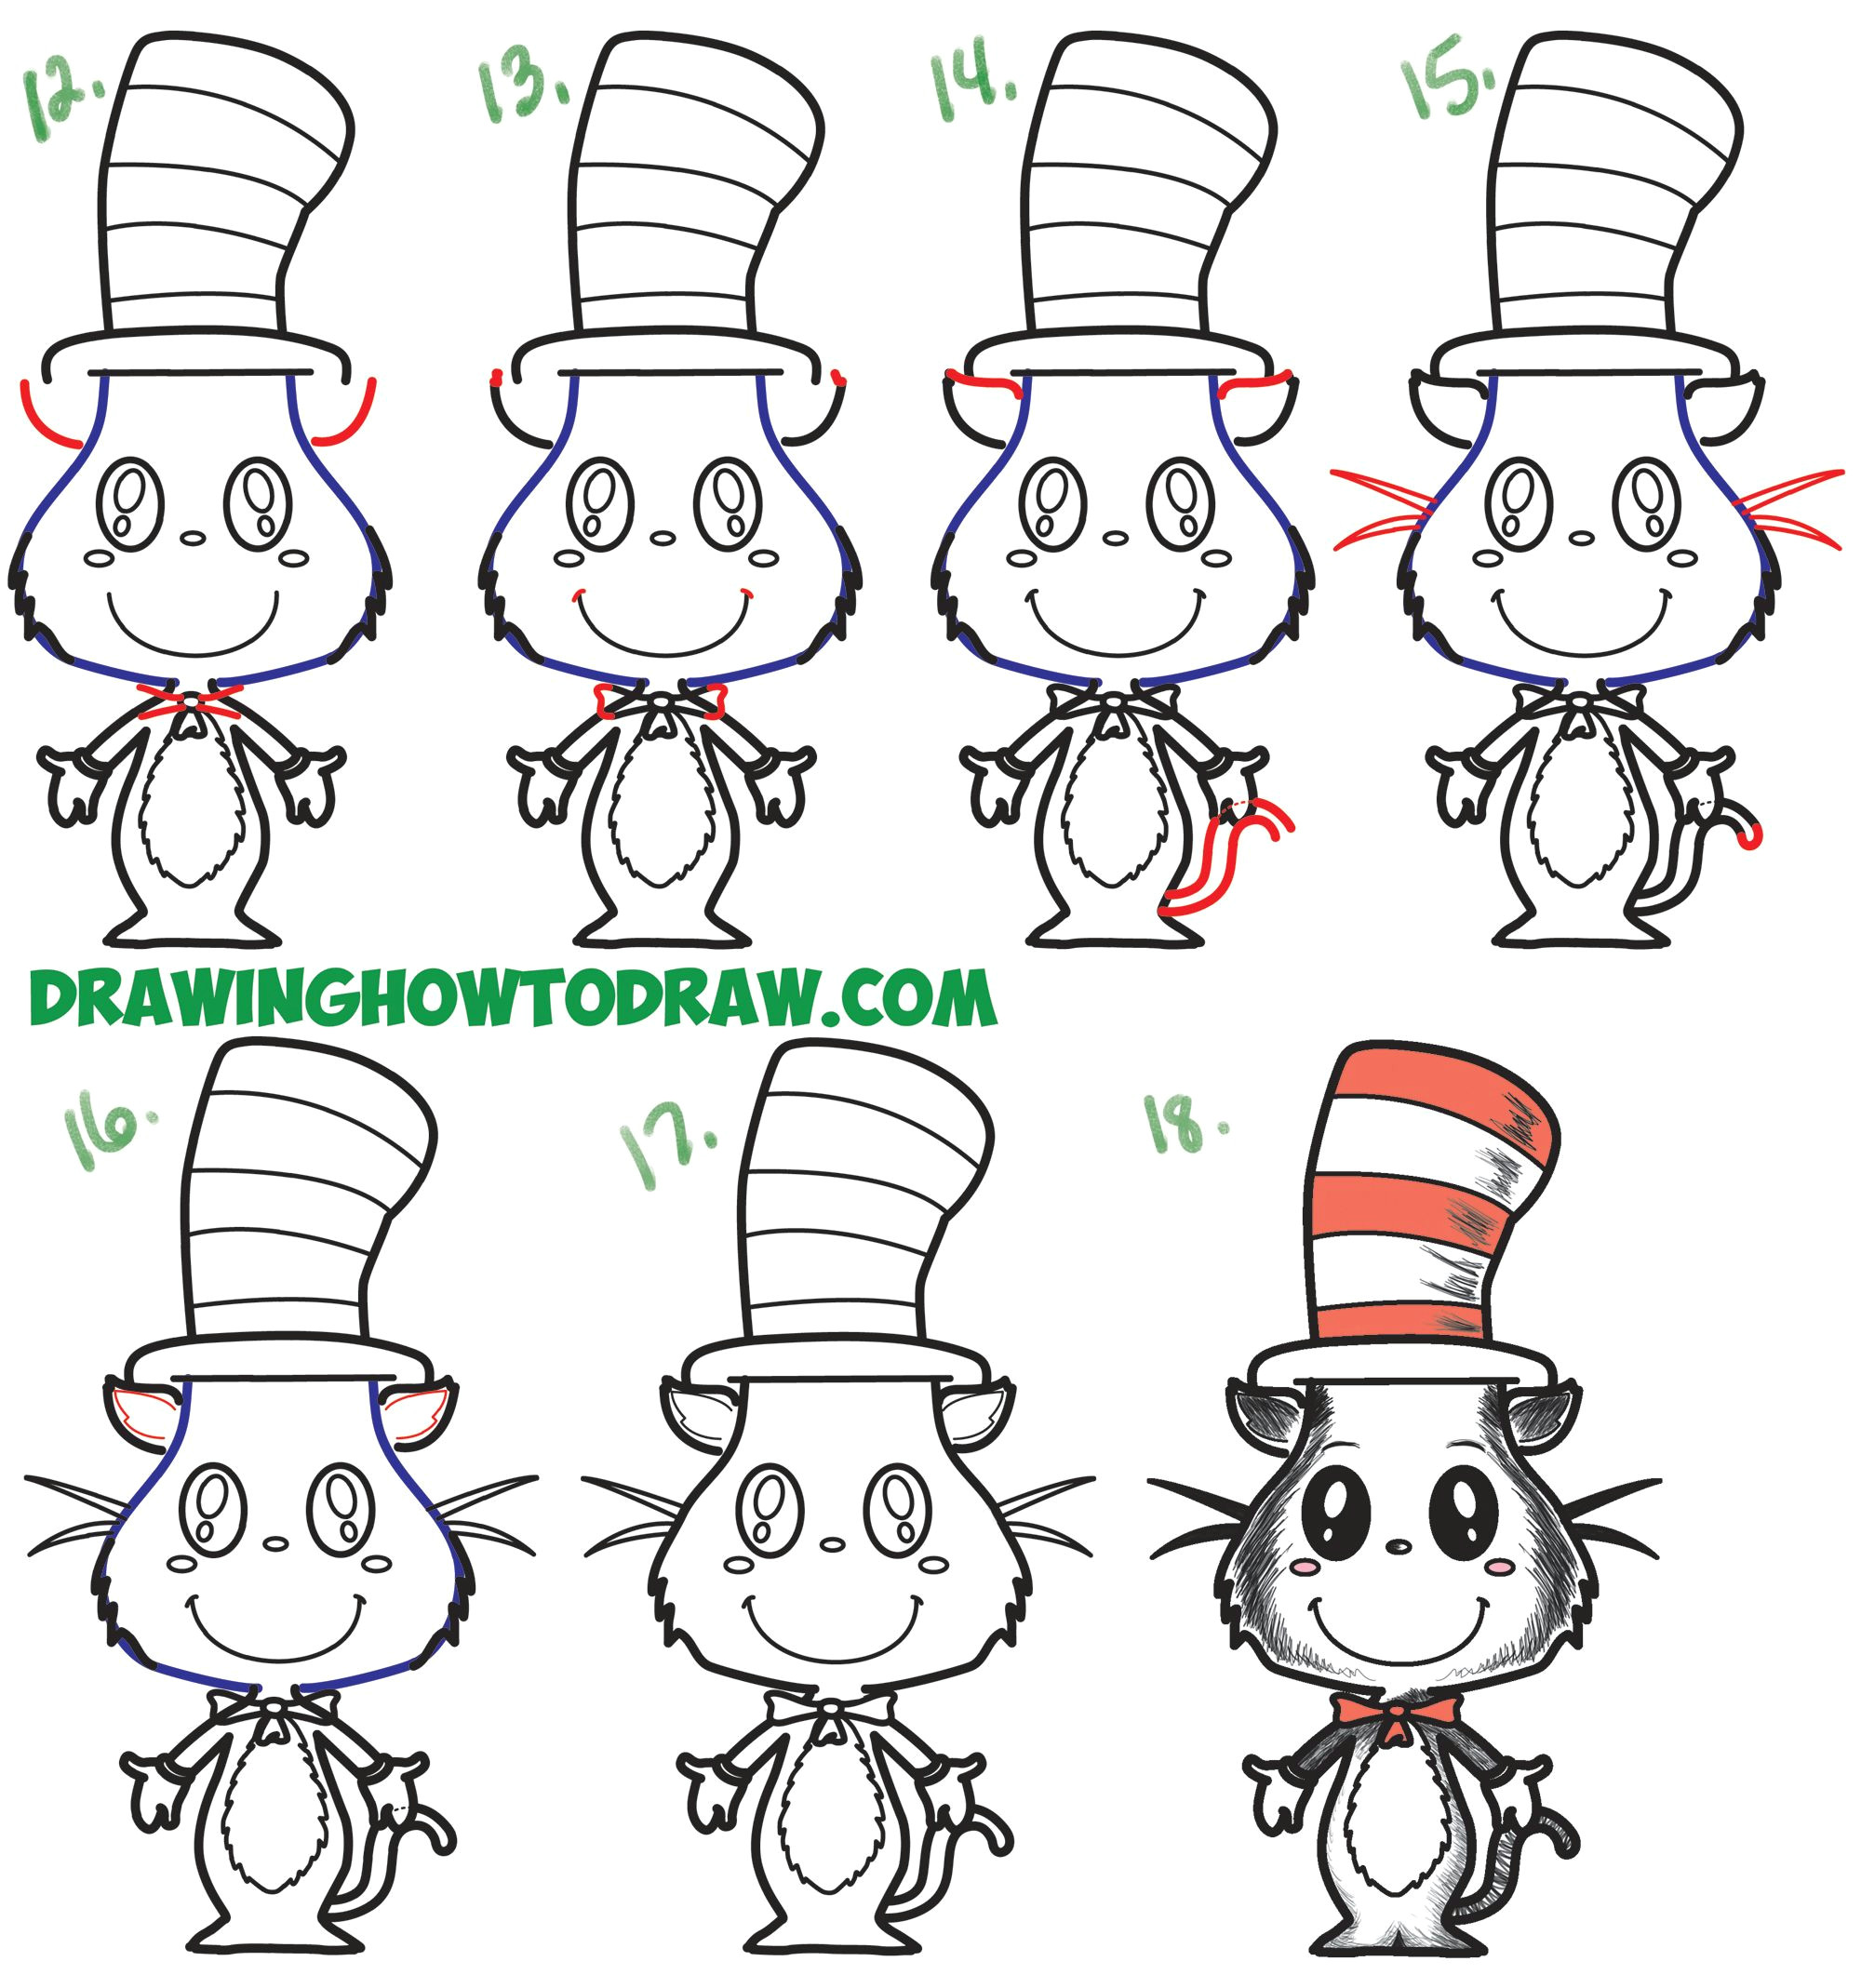 Drawing Of A Cat Step by Step How to Draw the Cat In the Hat Cute Kawaii Chibi Version Easy